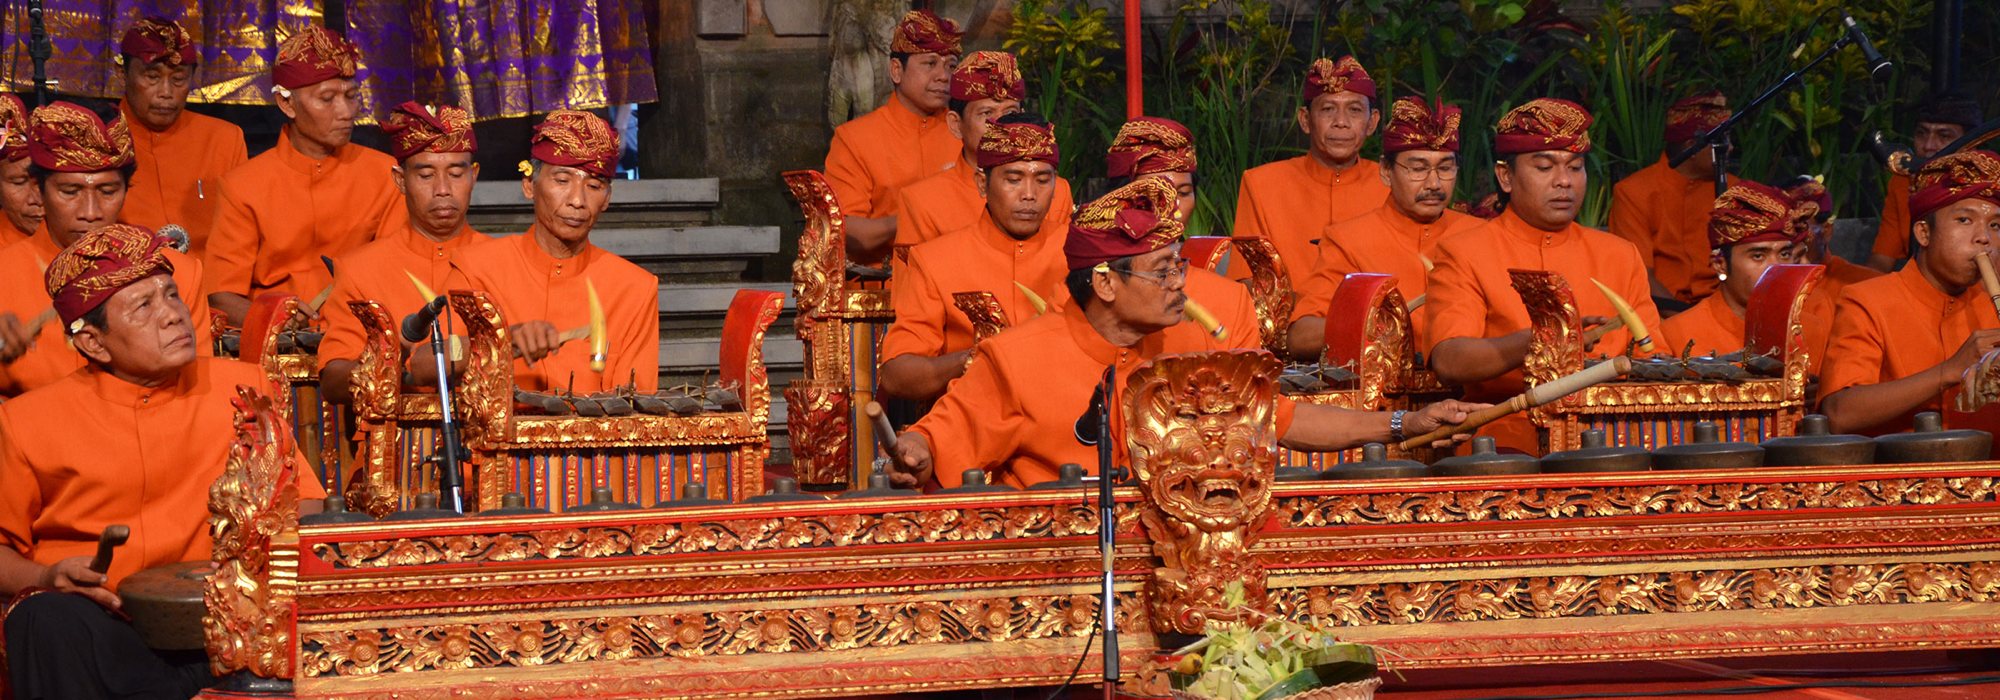 Talempong performers